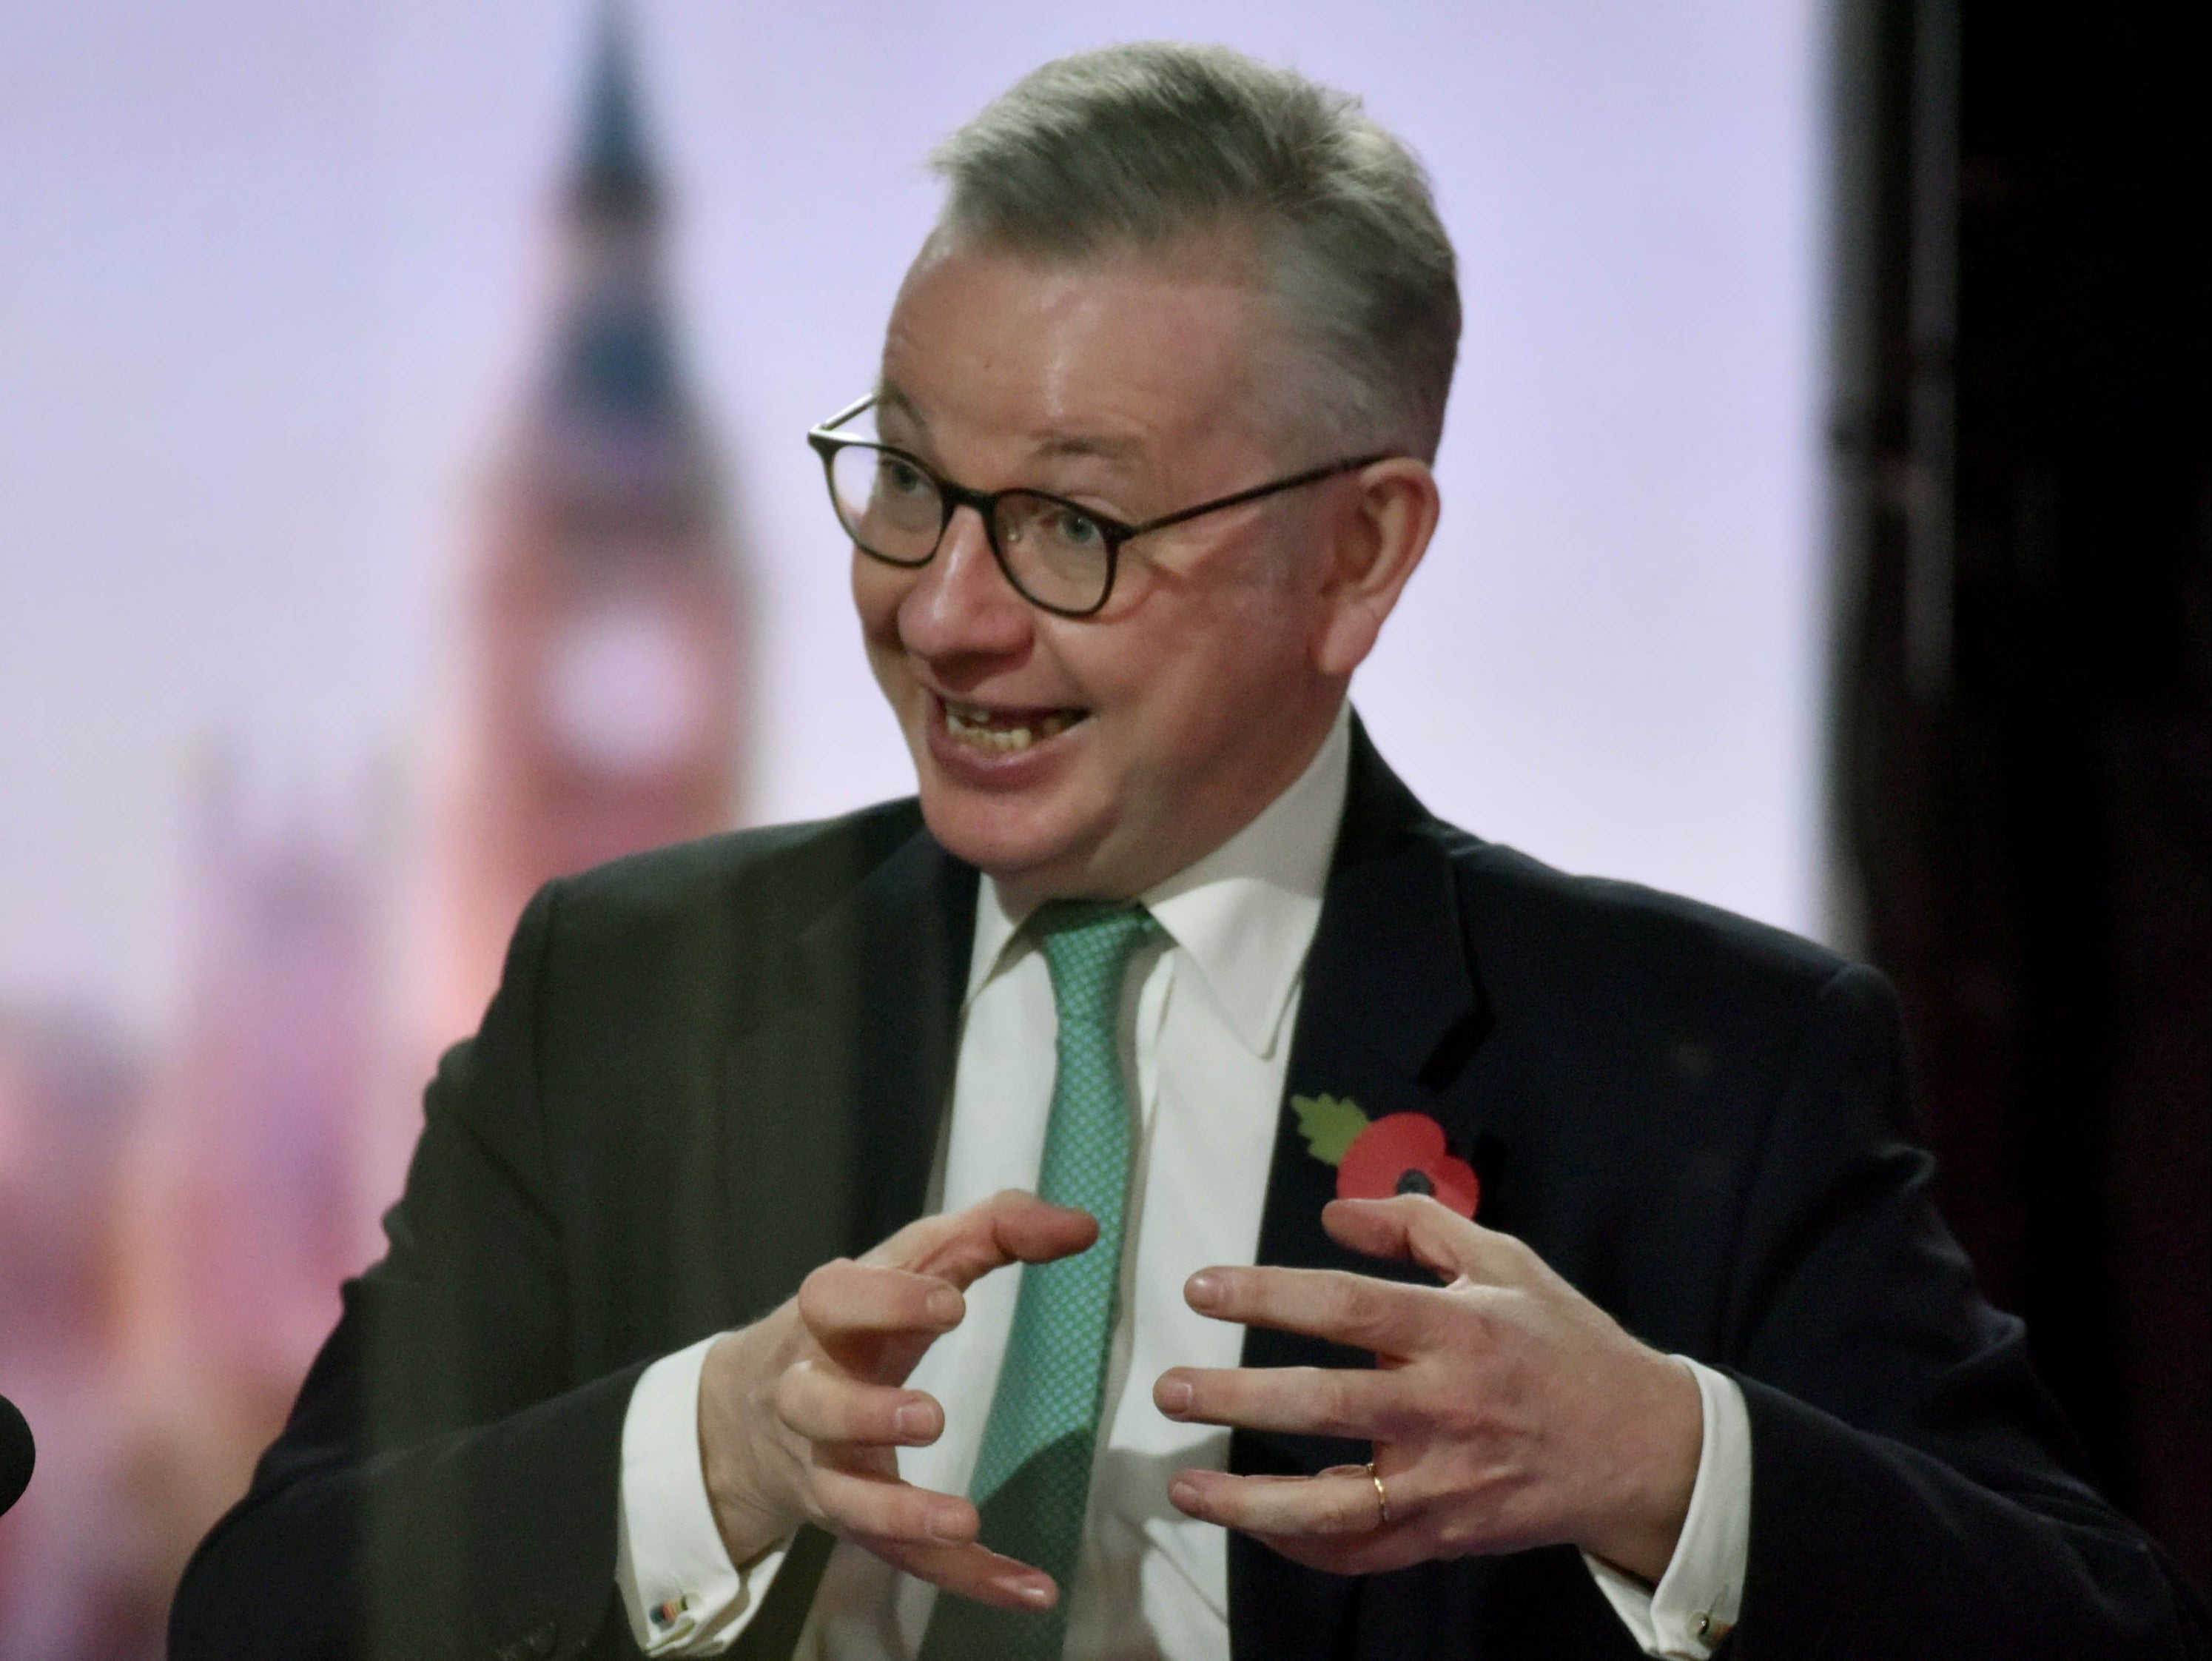 Michael Gove said the SNP promises that 2014 was a ‘once-in-a-generation’ vote must be upheld